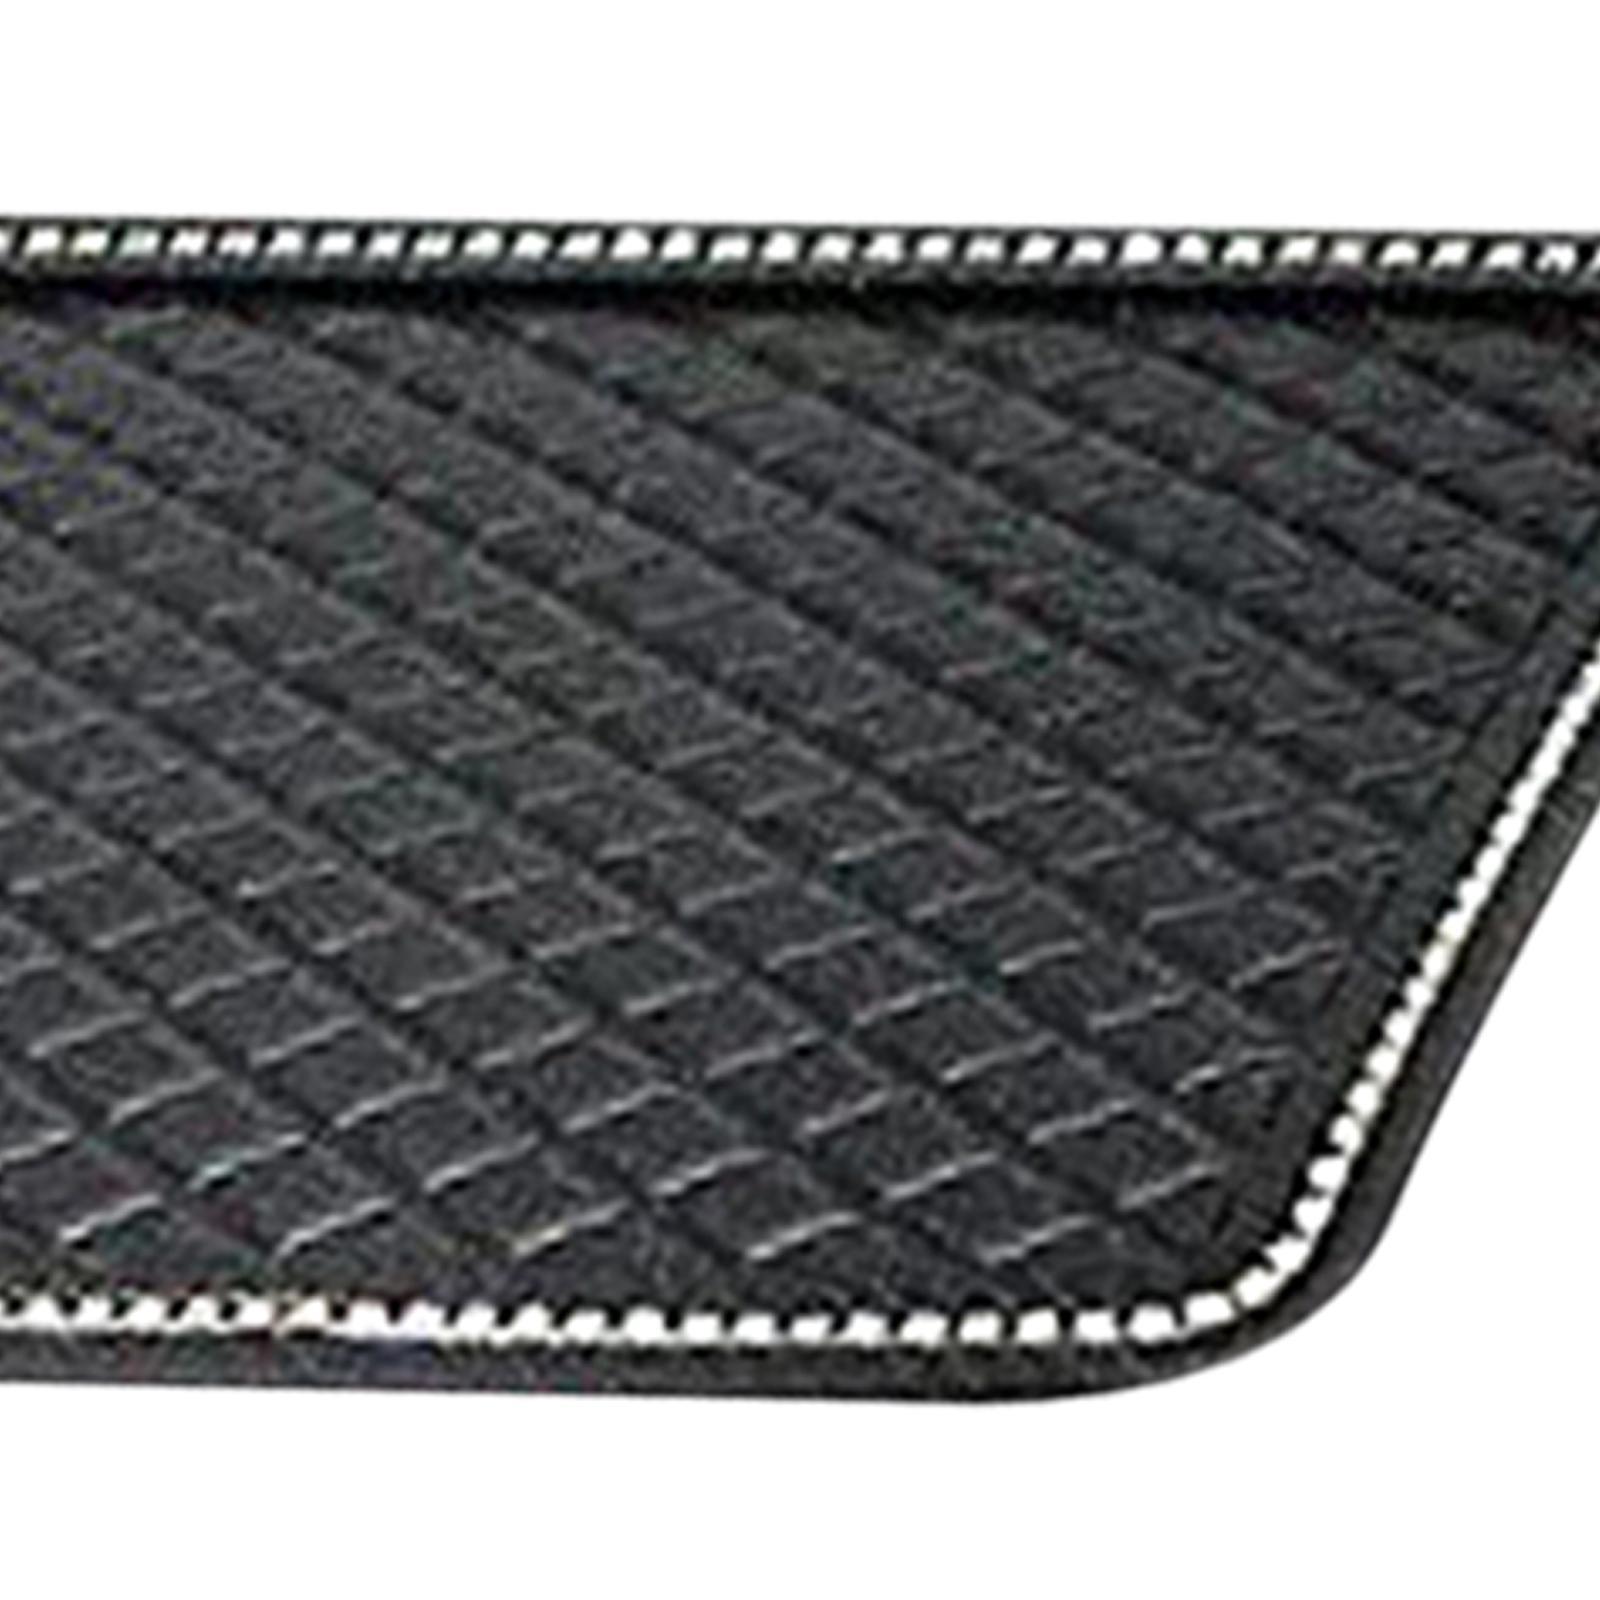 Car Anti Slip Sticky Dashboard Pad Gripping Pad for Phones Electronic Devices